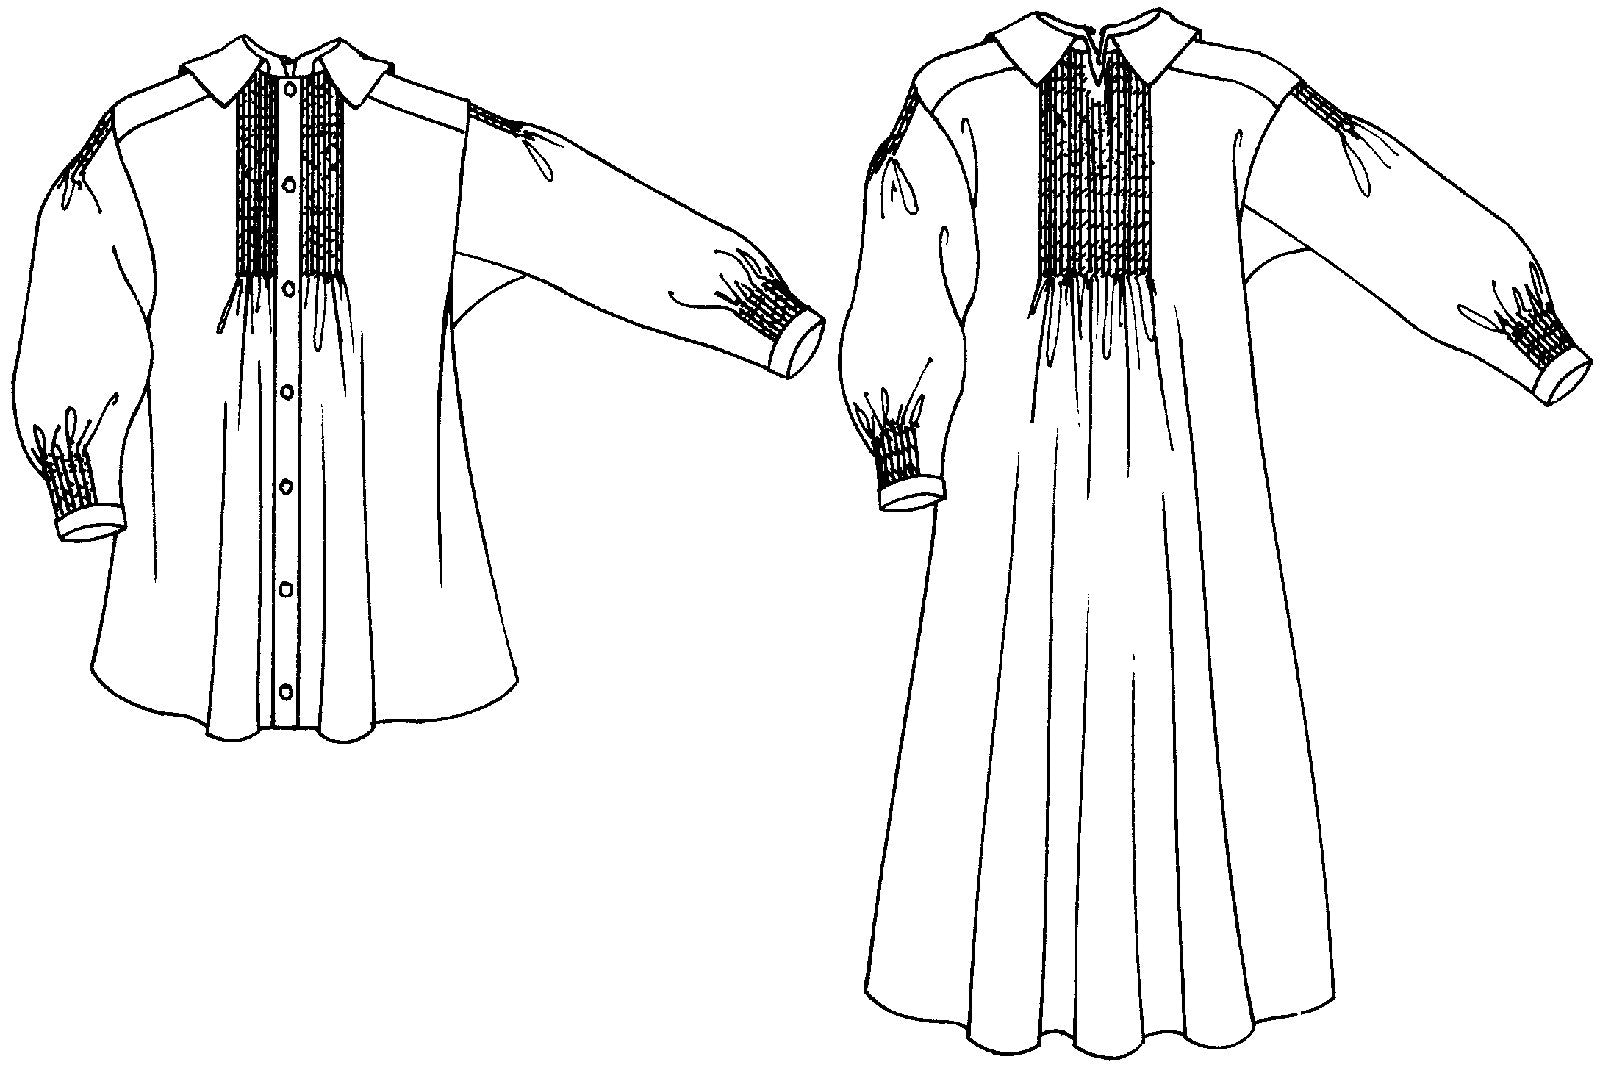 Black and white flat-line pattern drawing of front view of round frock and smock frock.